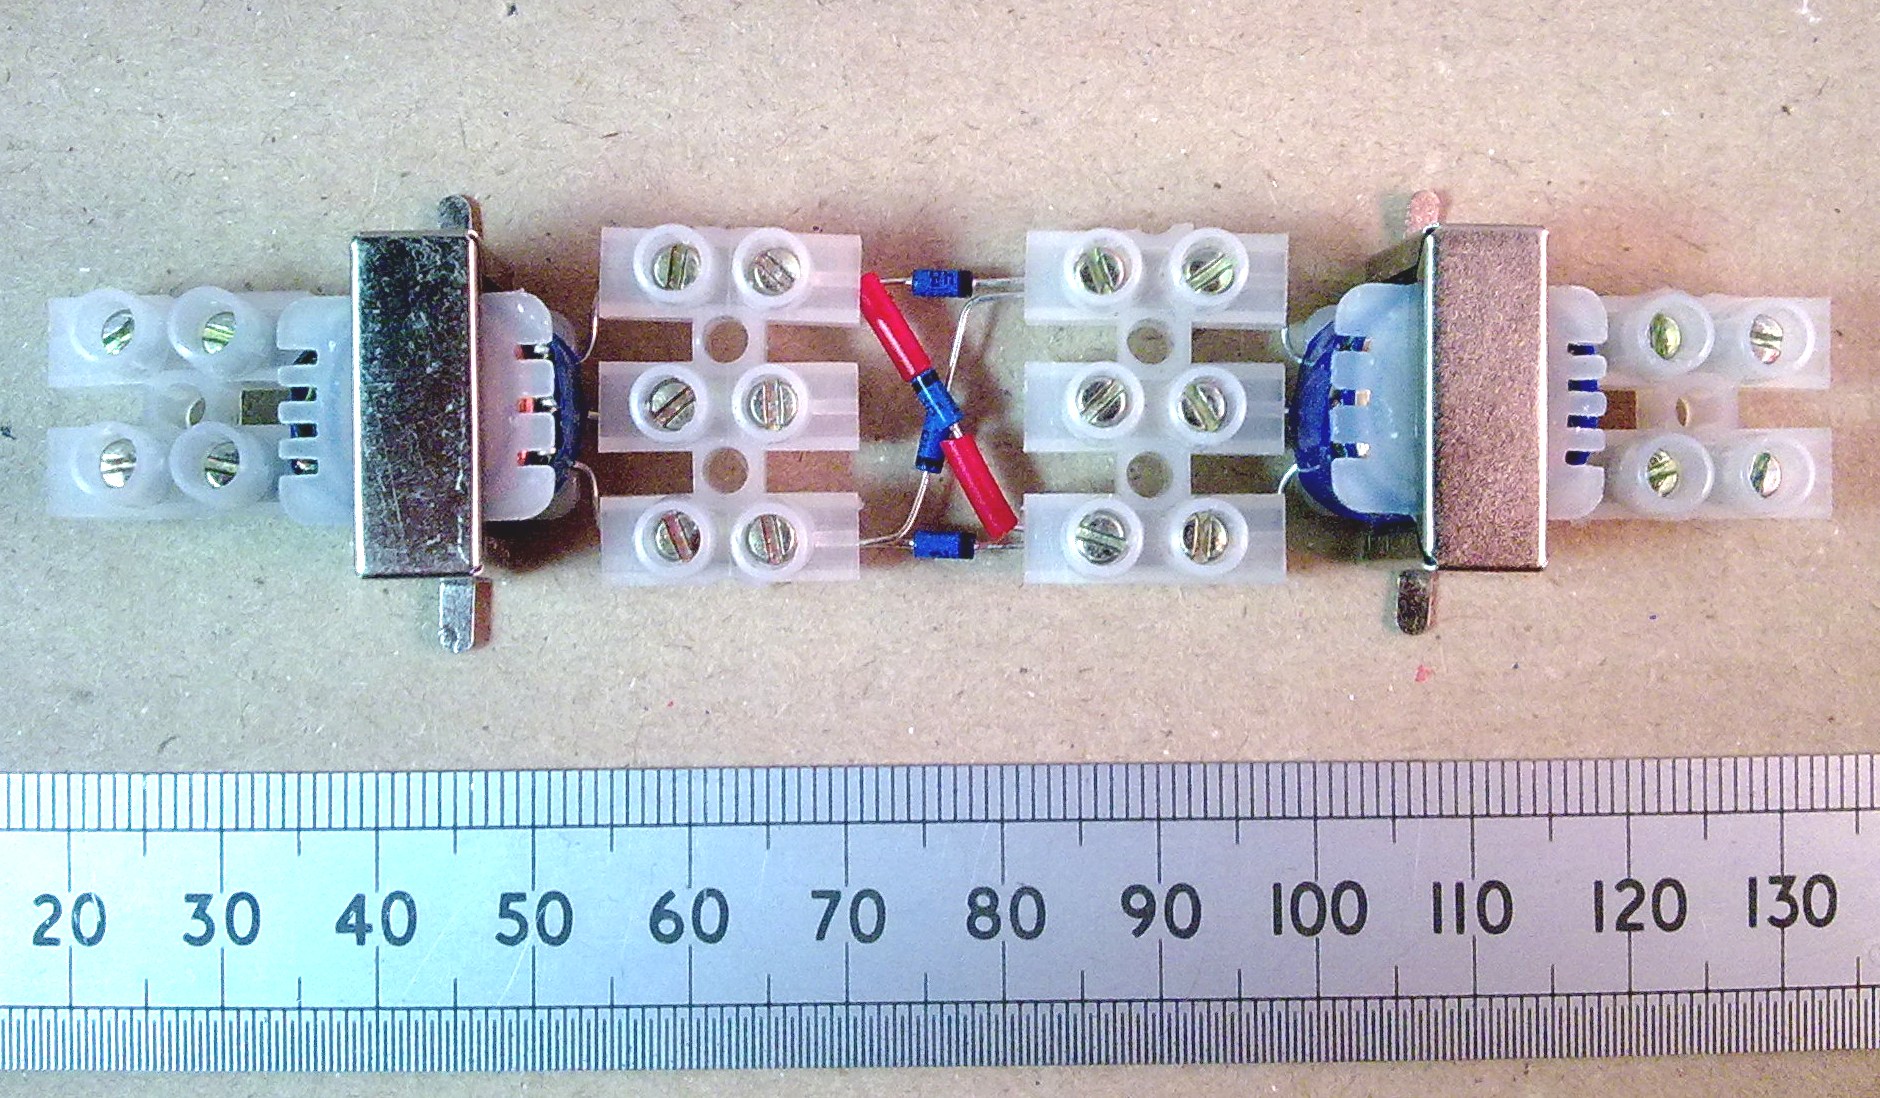 Balanced Modulator
            before connecting the wires